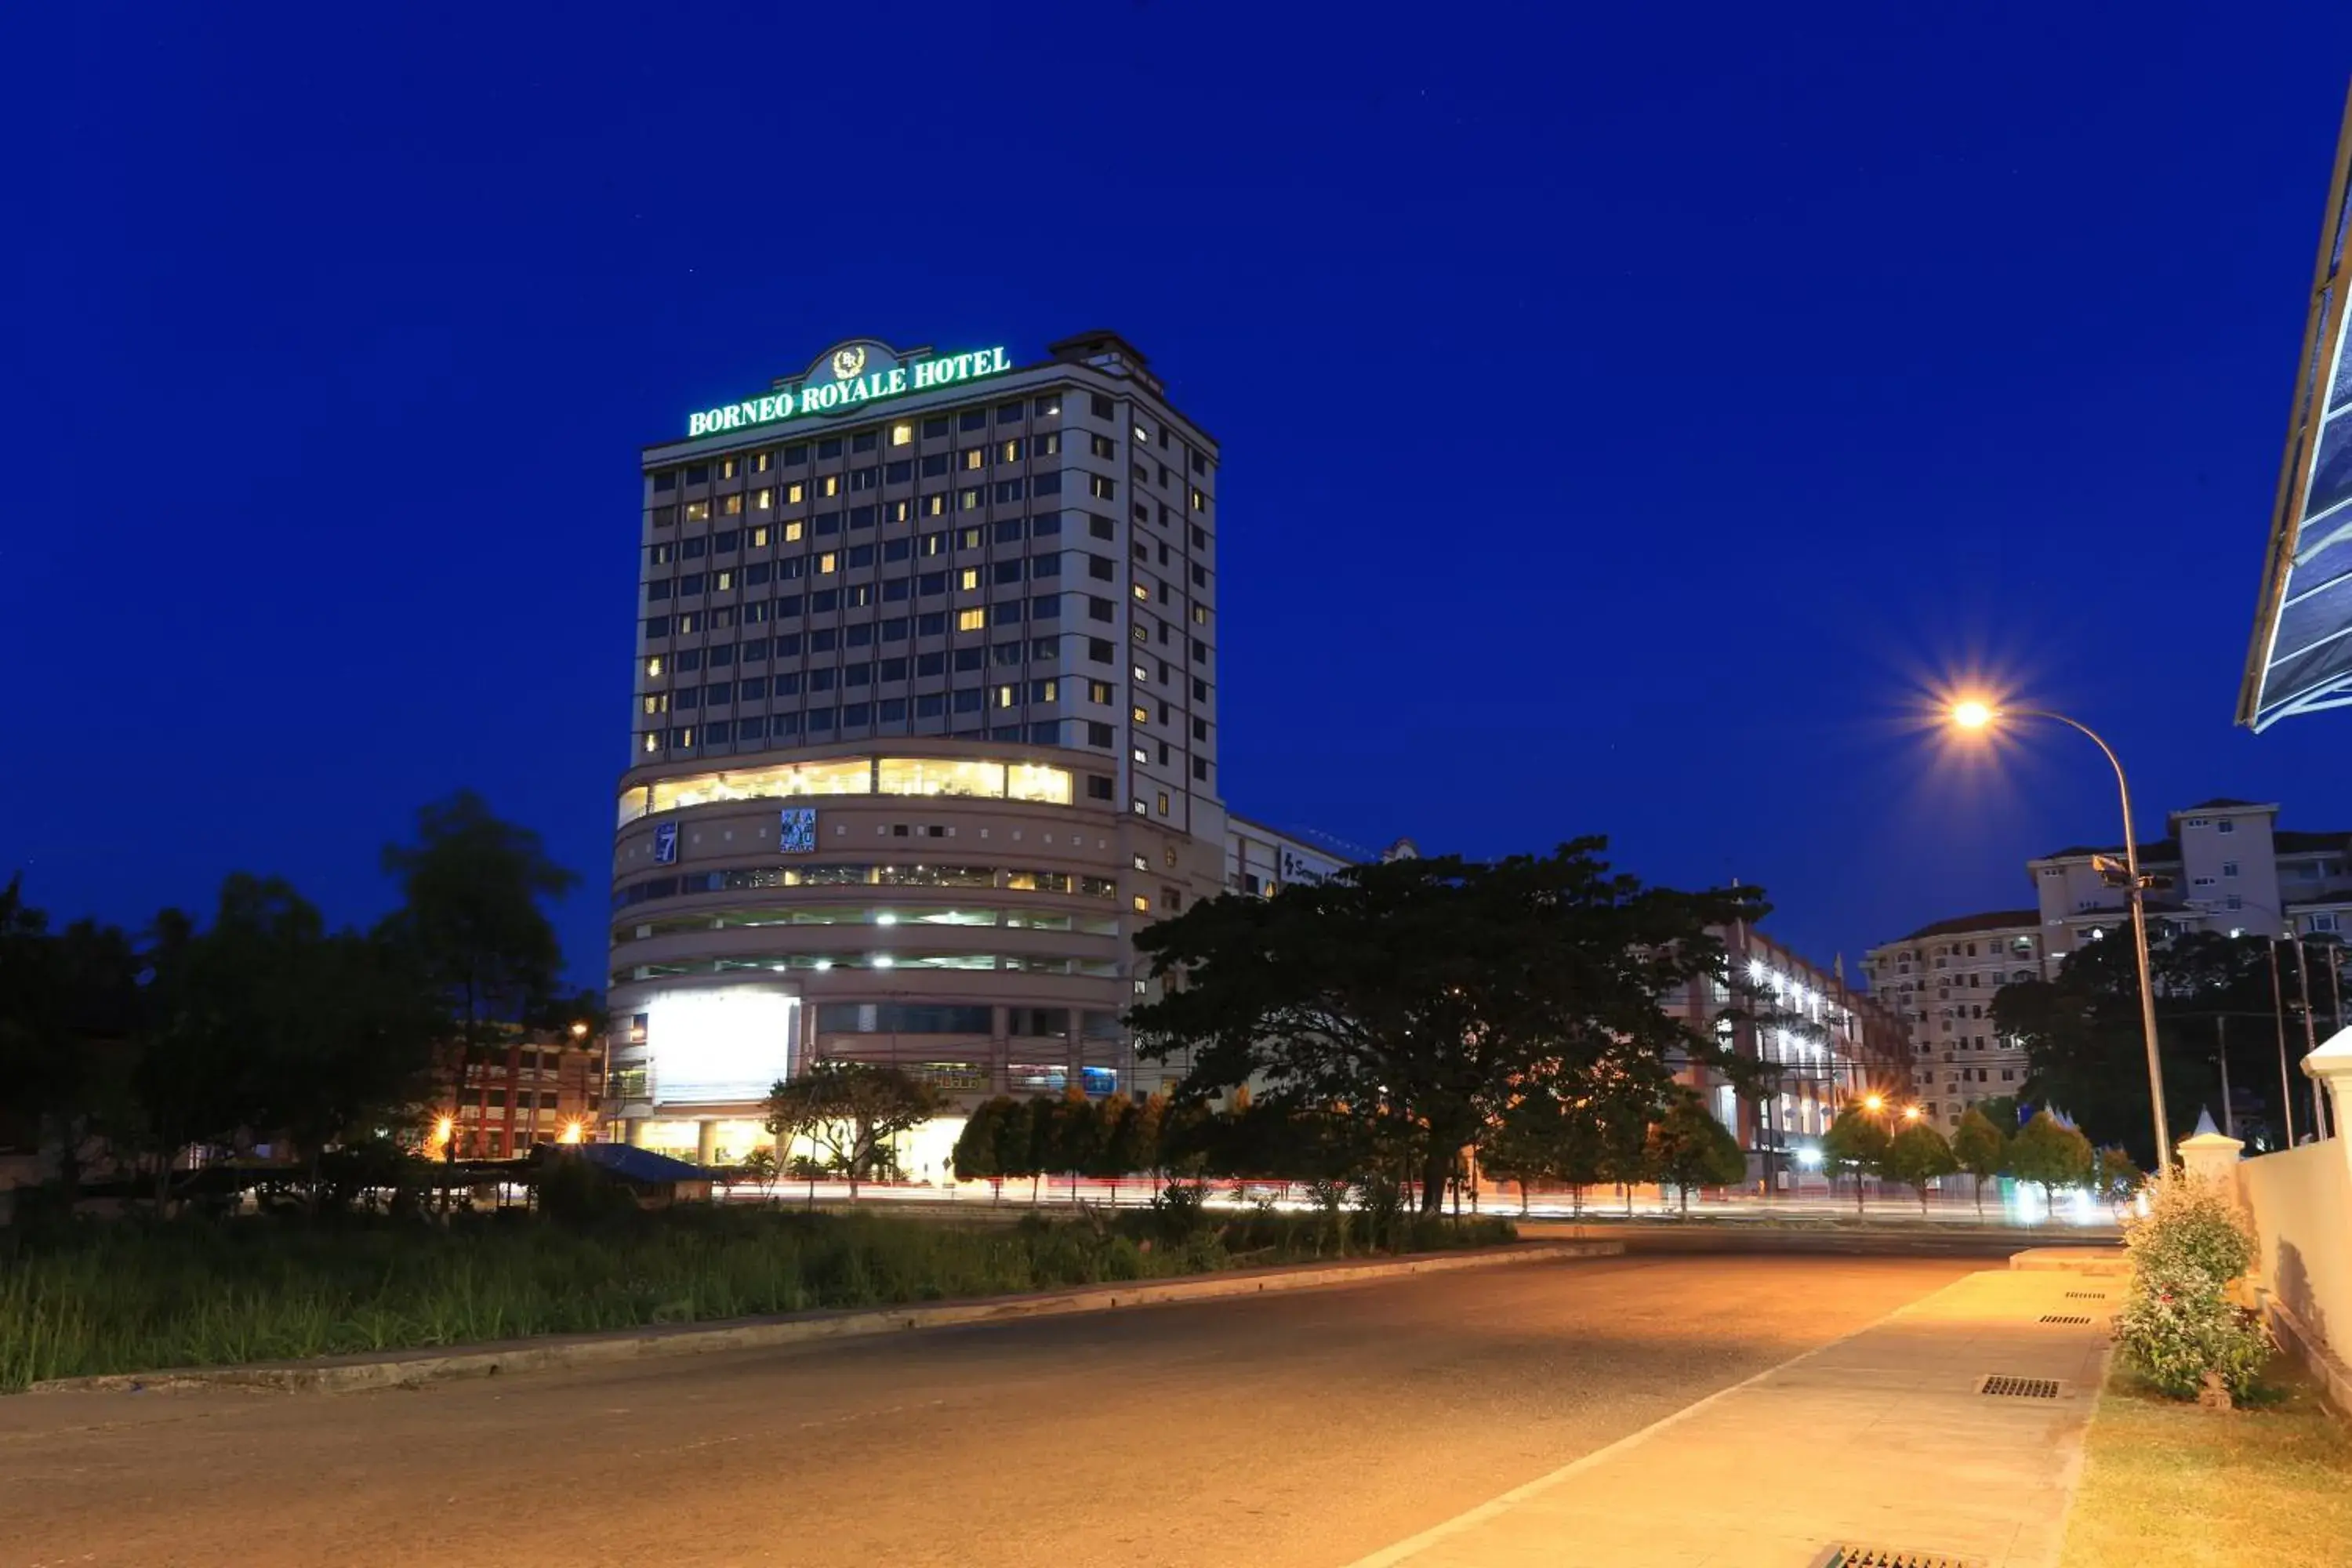 Property Building in Borneo Royale Hotel